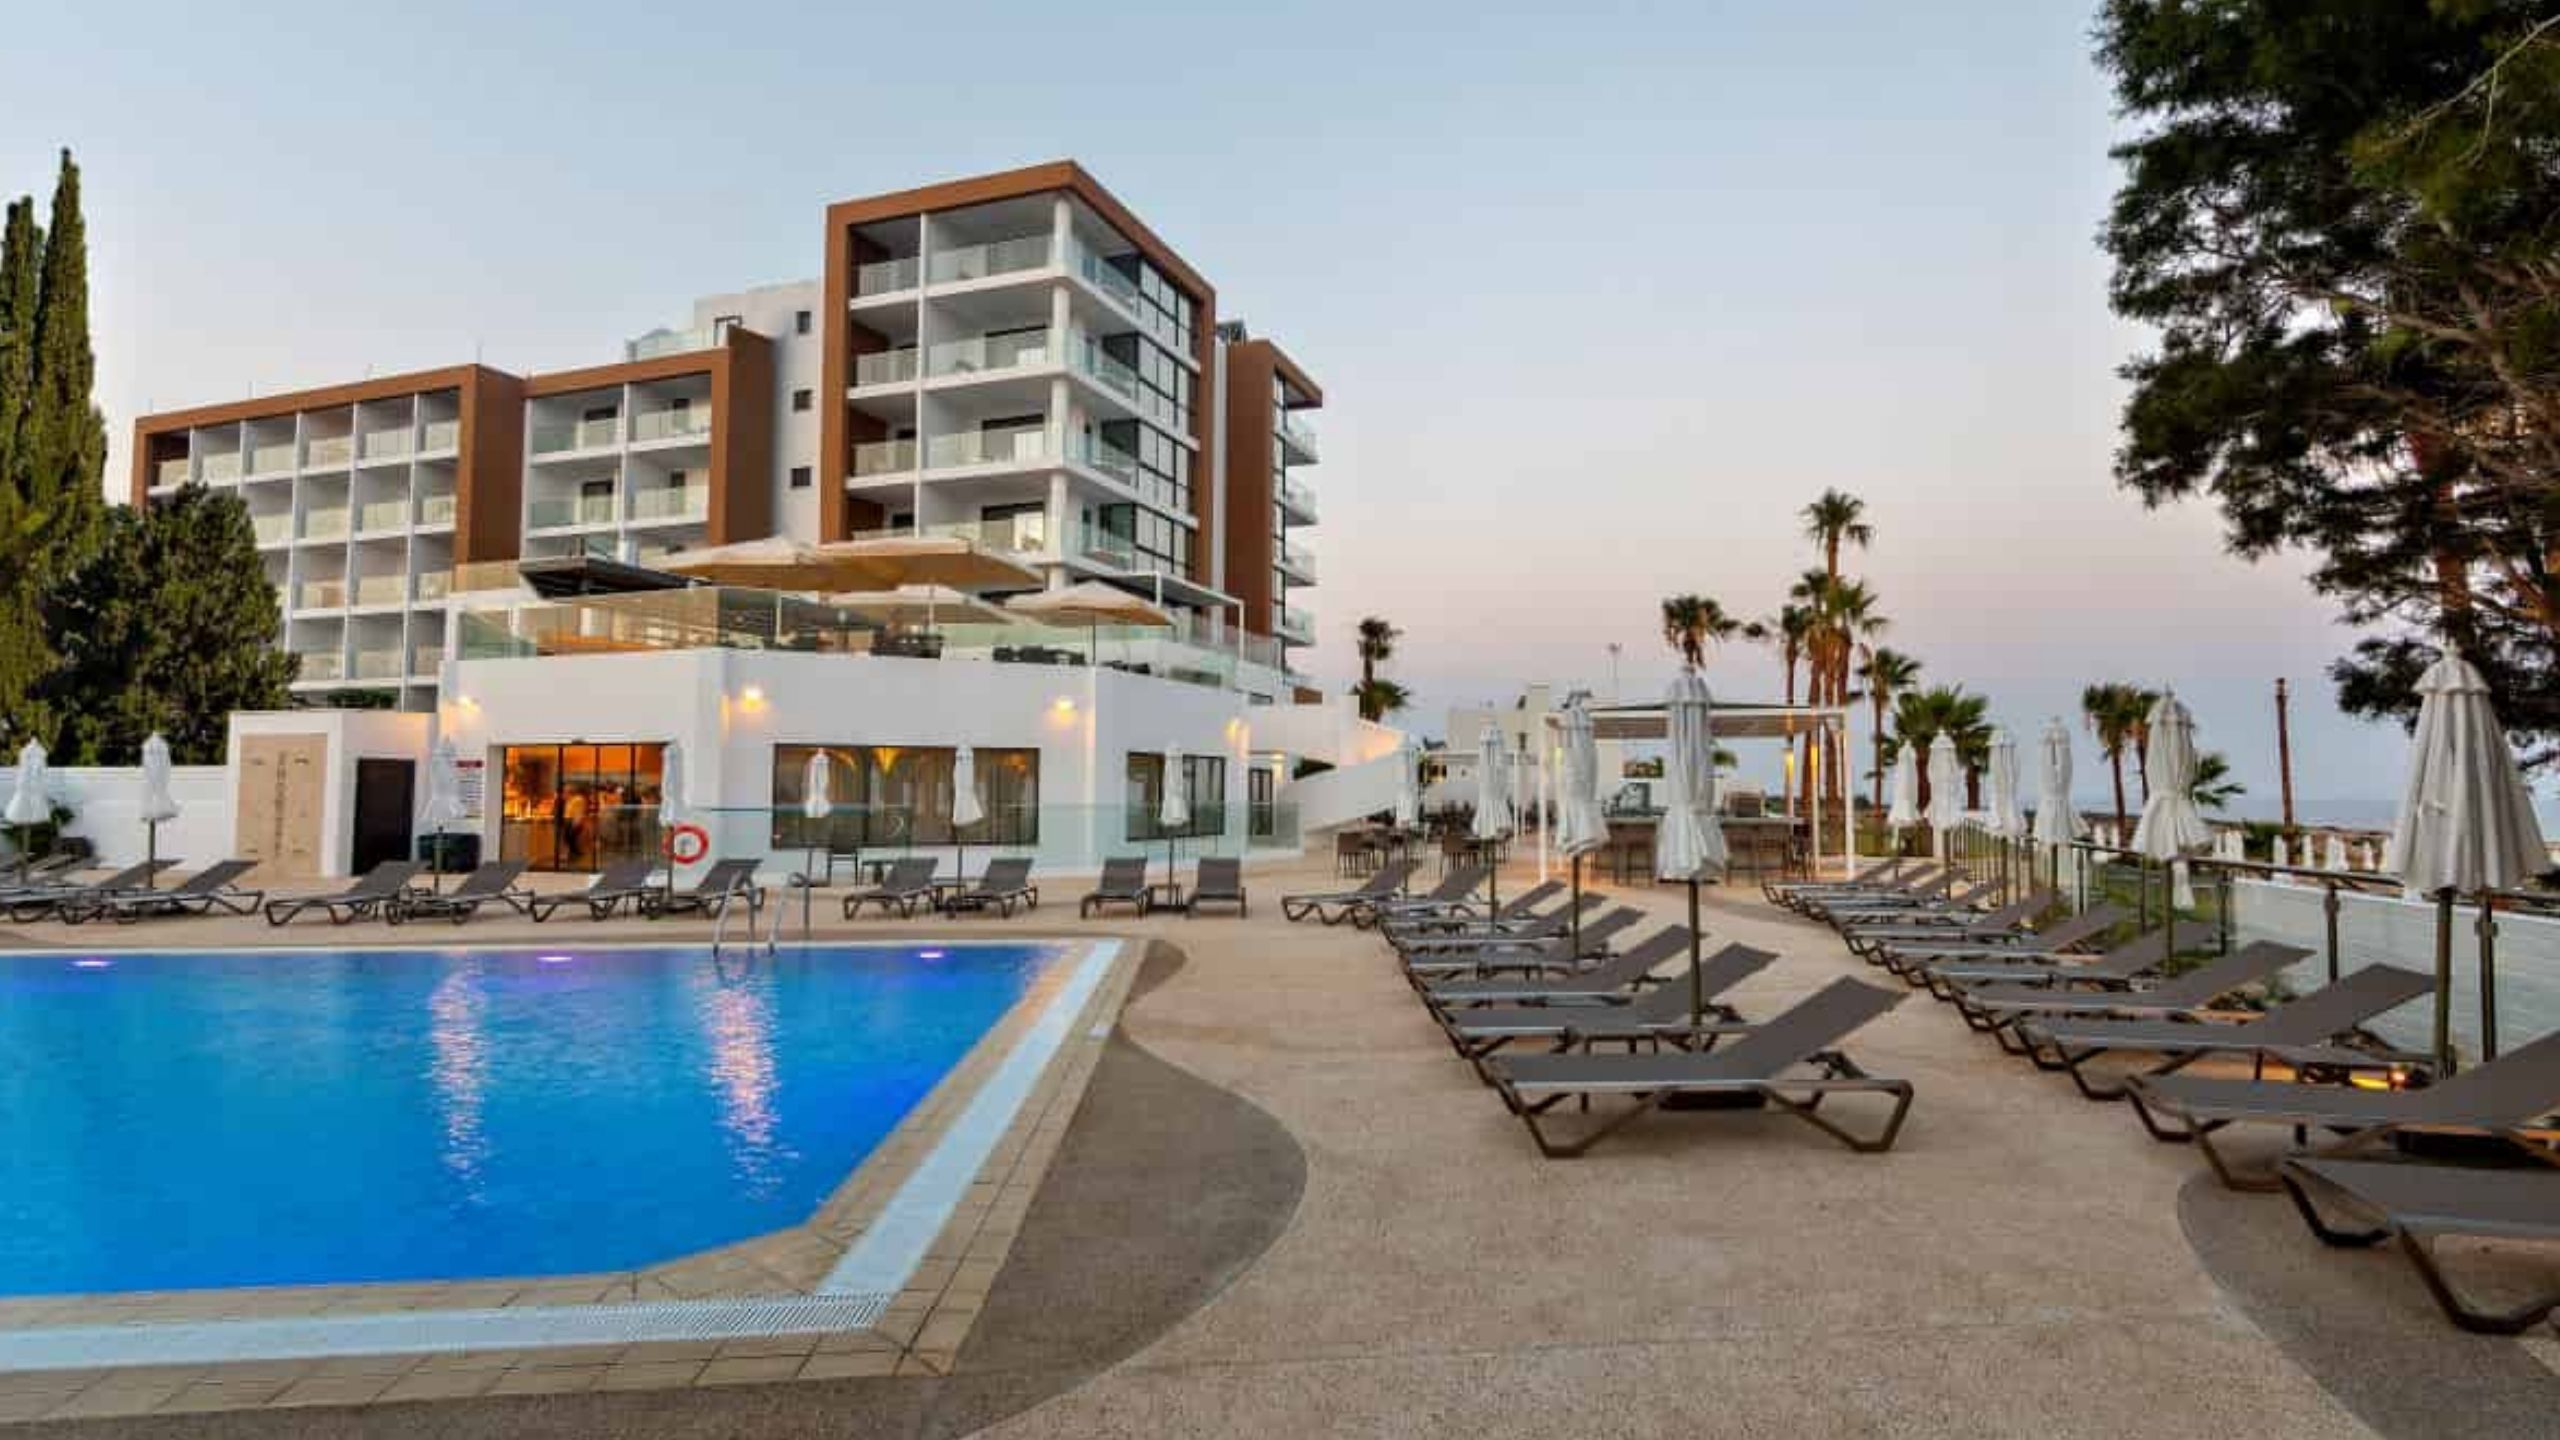 Leonardo Crystal Cove Hotel and Spa by the Sea in Cyprus